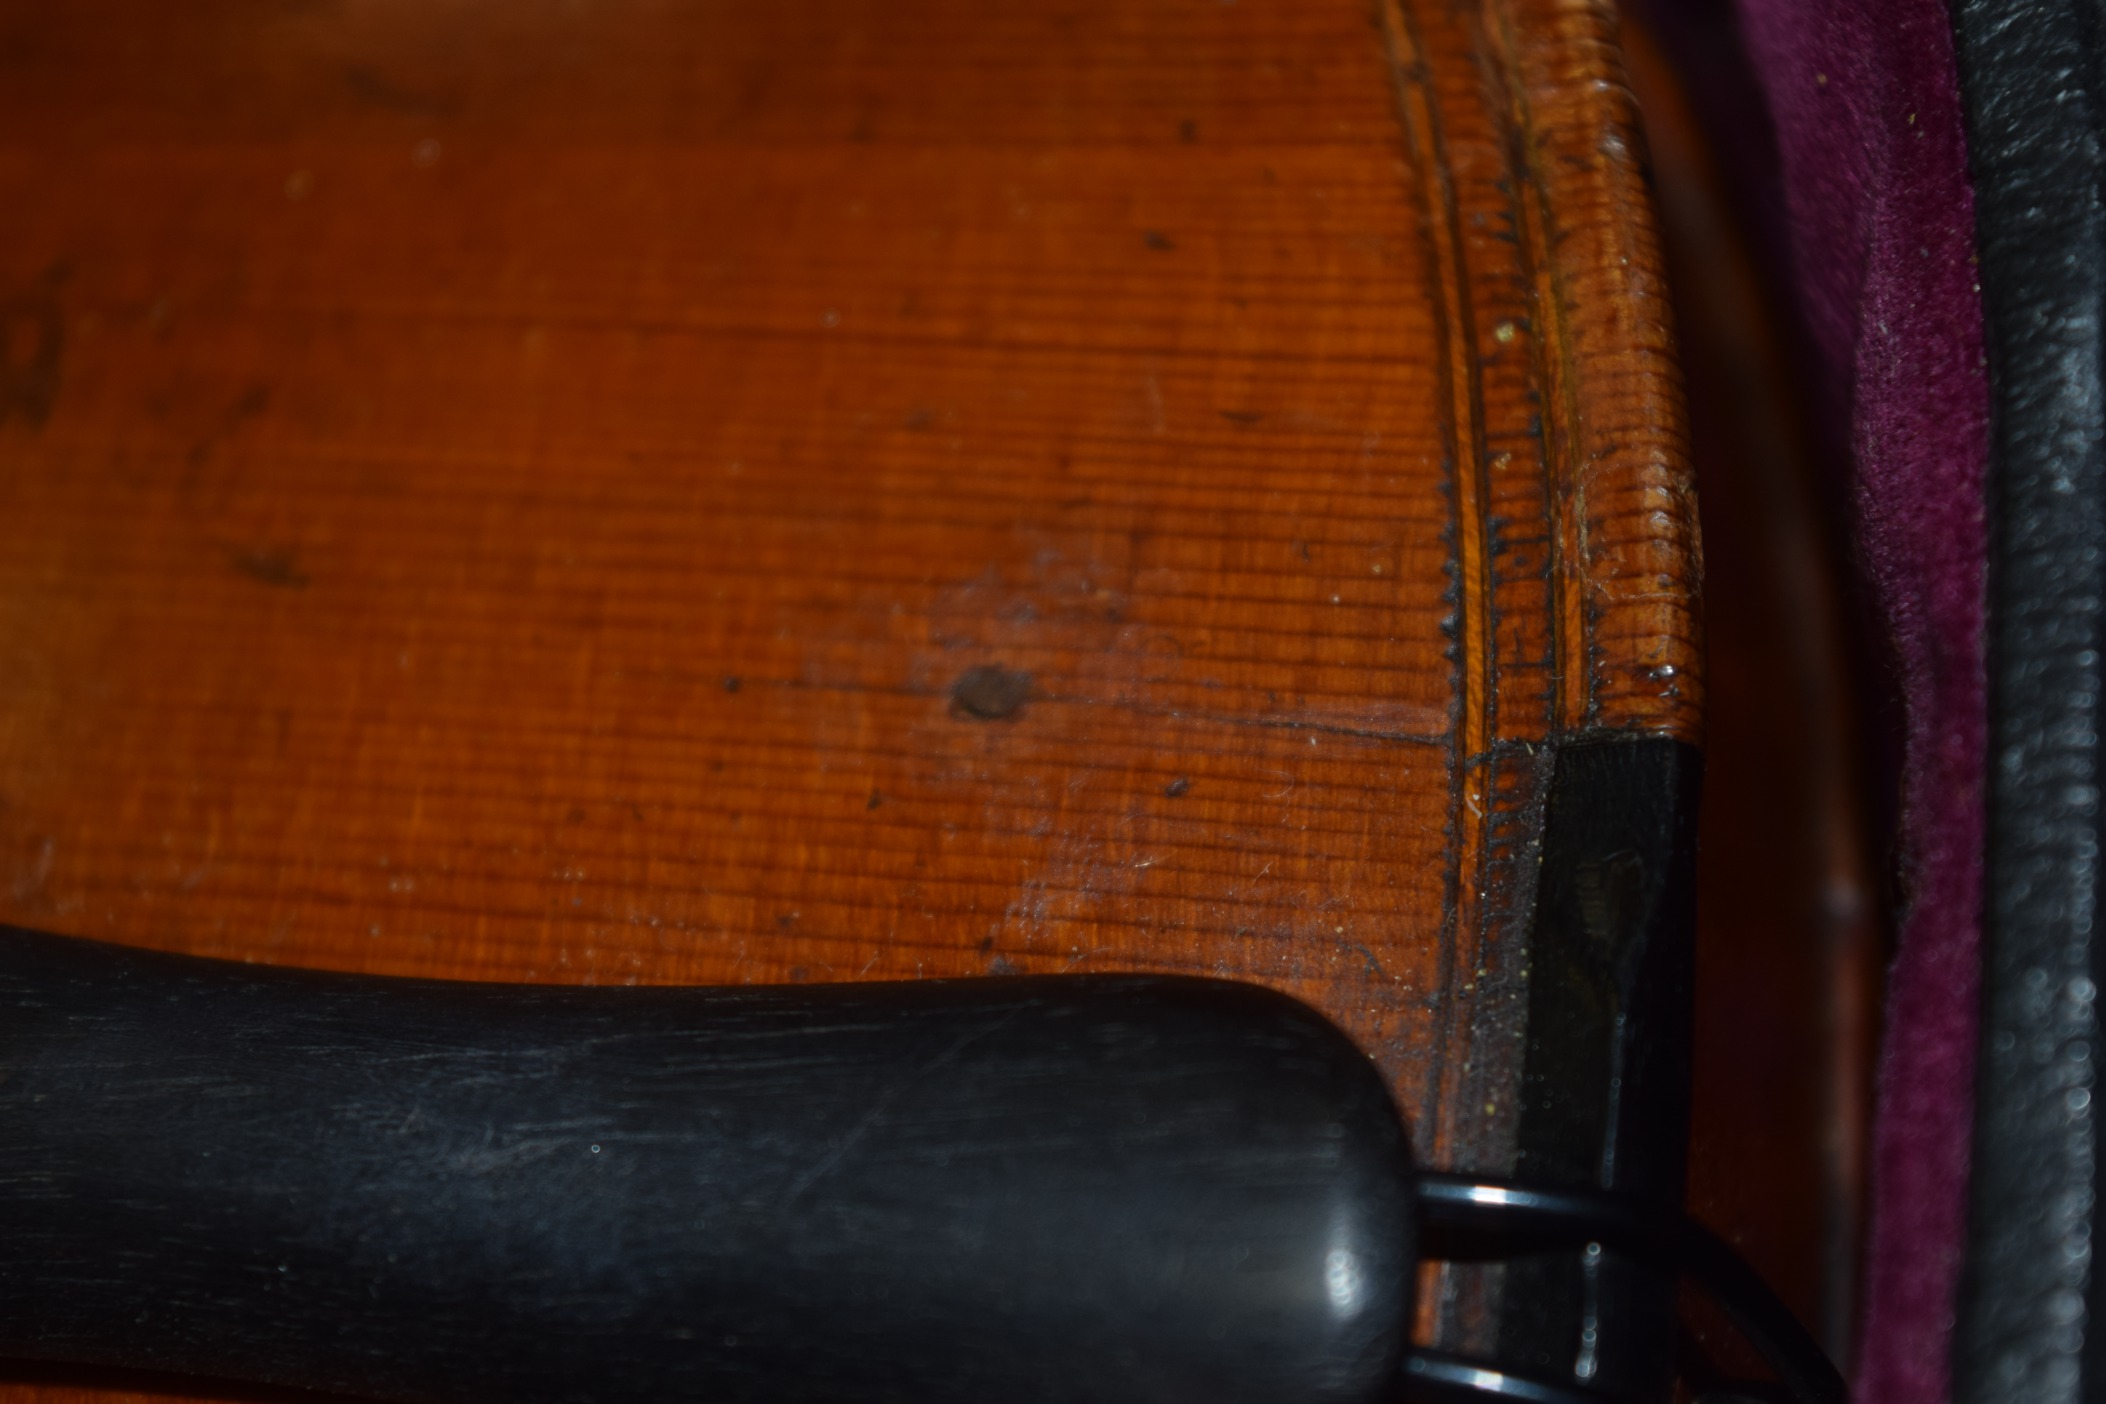 A GOOD ANTIQUE VIOLIN, bearing interior label "Gionvam Paulo Maggini, 1698", together with a bow. - Image 8 of 9